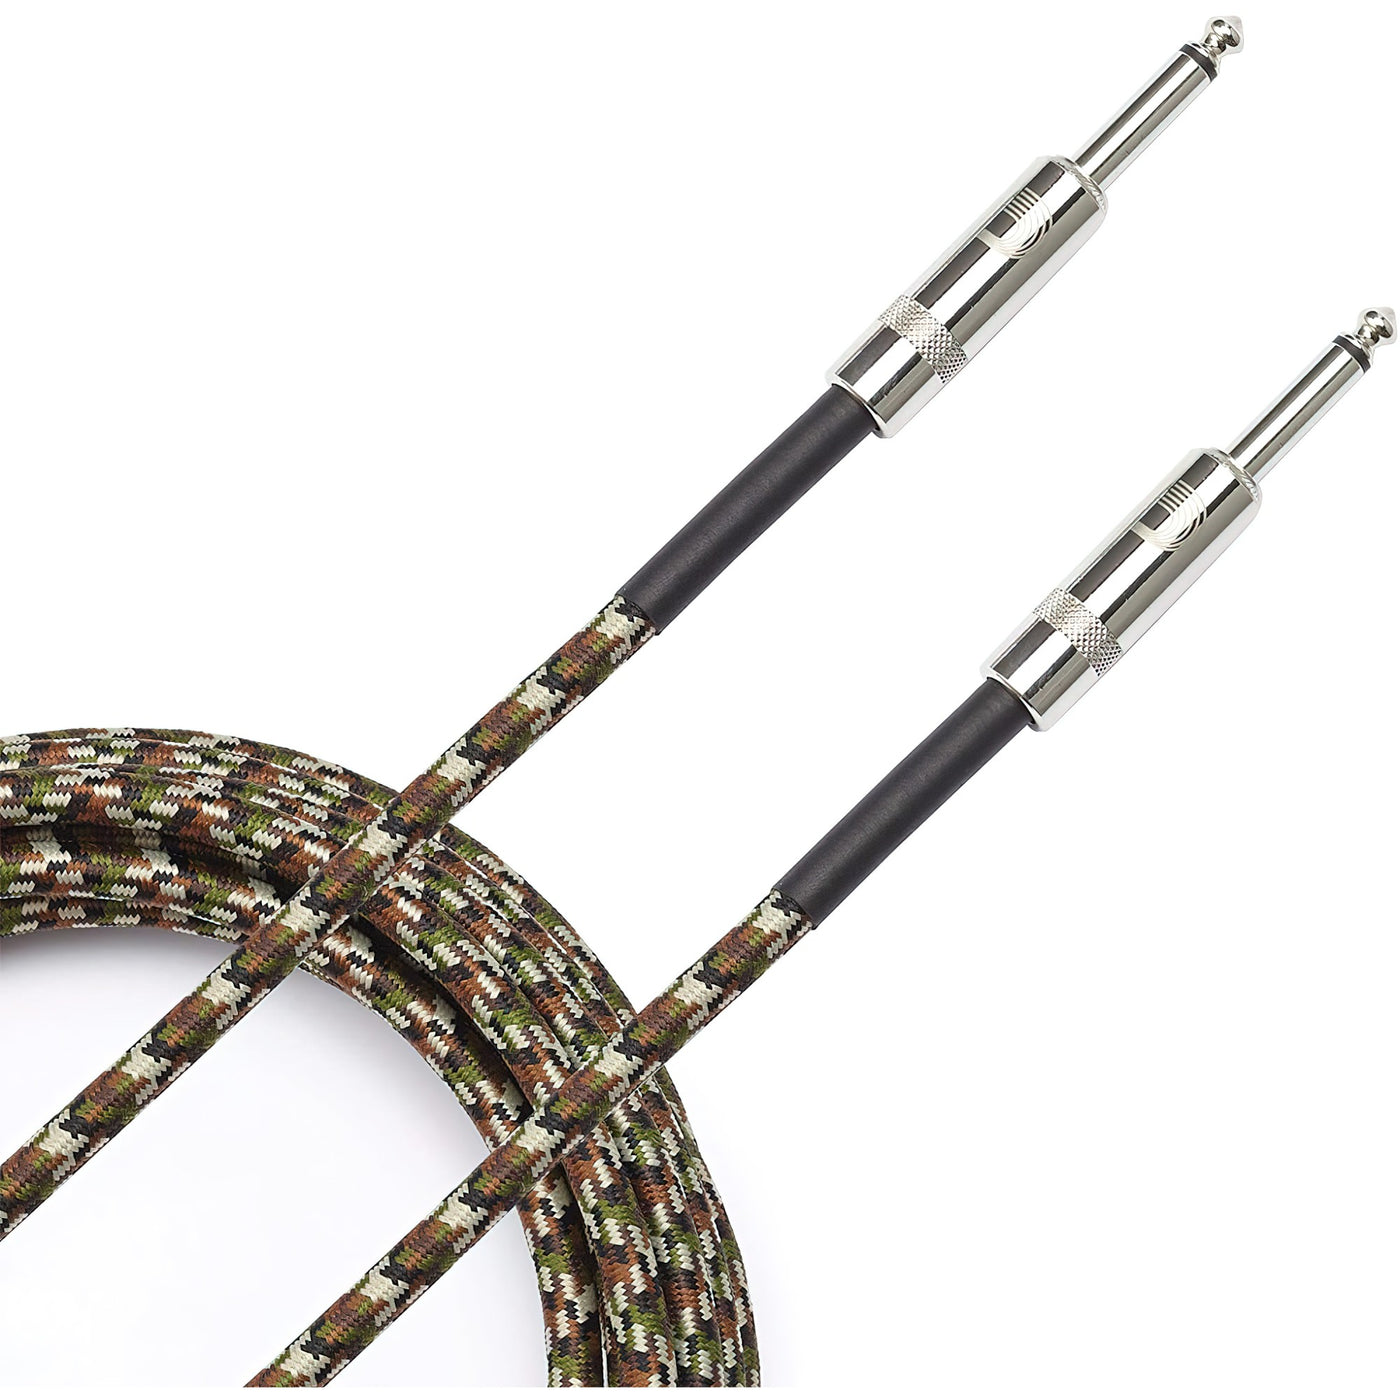 D'Addario Custom Series Braided Instrument Cable, Camouflage, 20' (PW-BG-20CF)